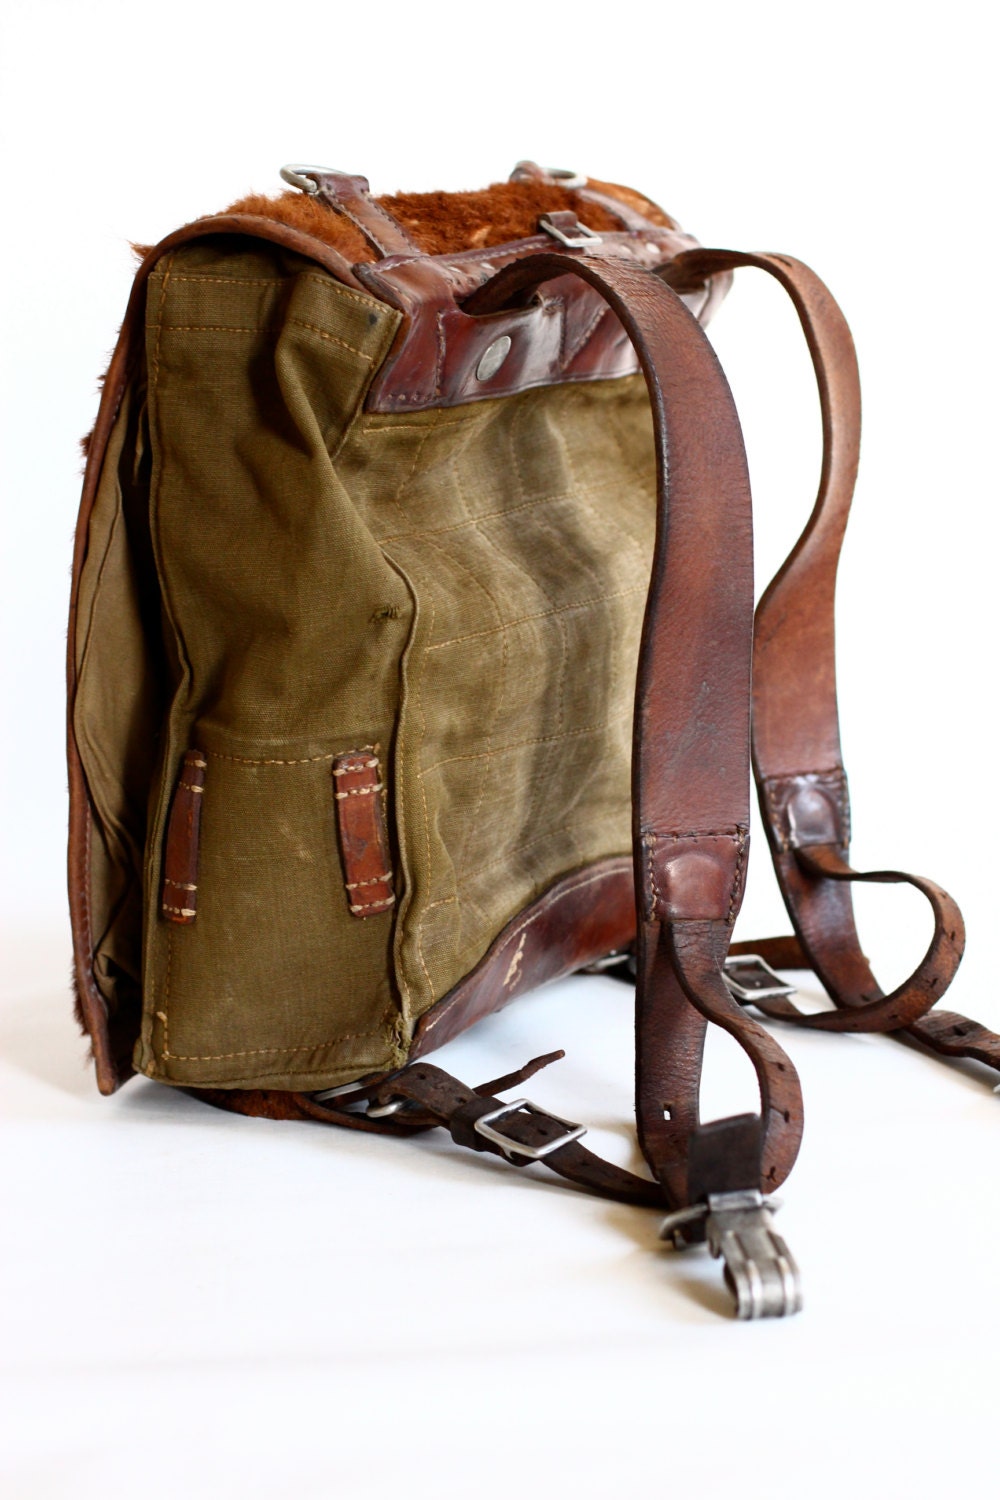 WW2 Backpack Leather Canvas and Cowhide Rucksack